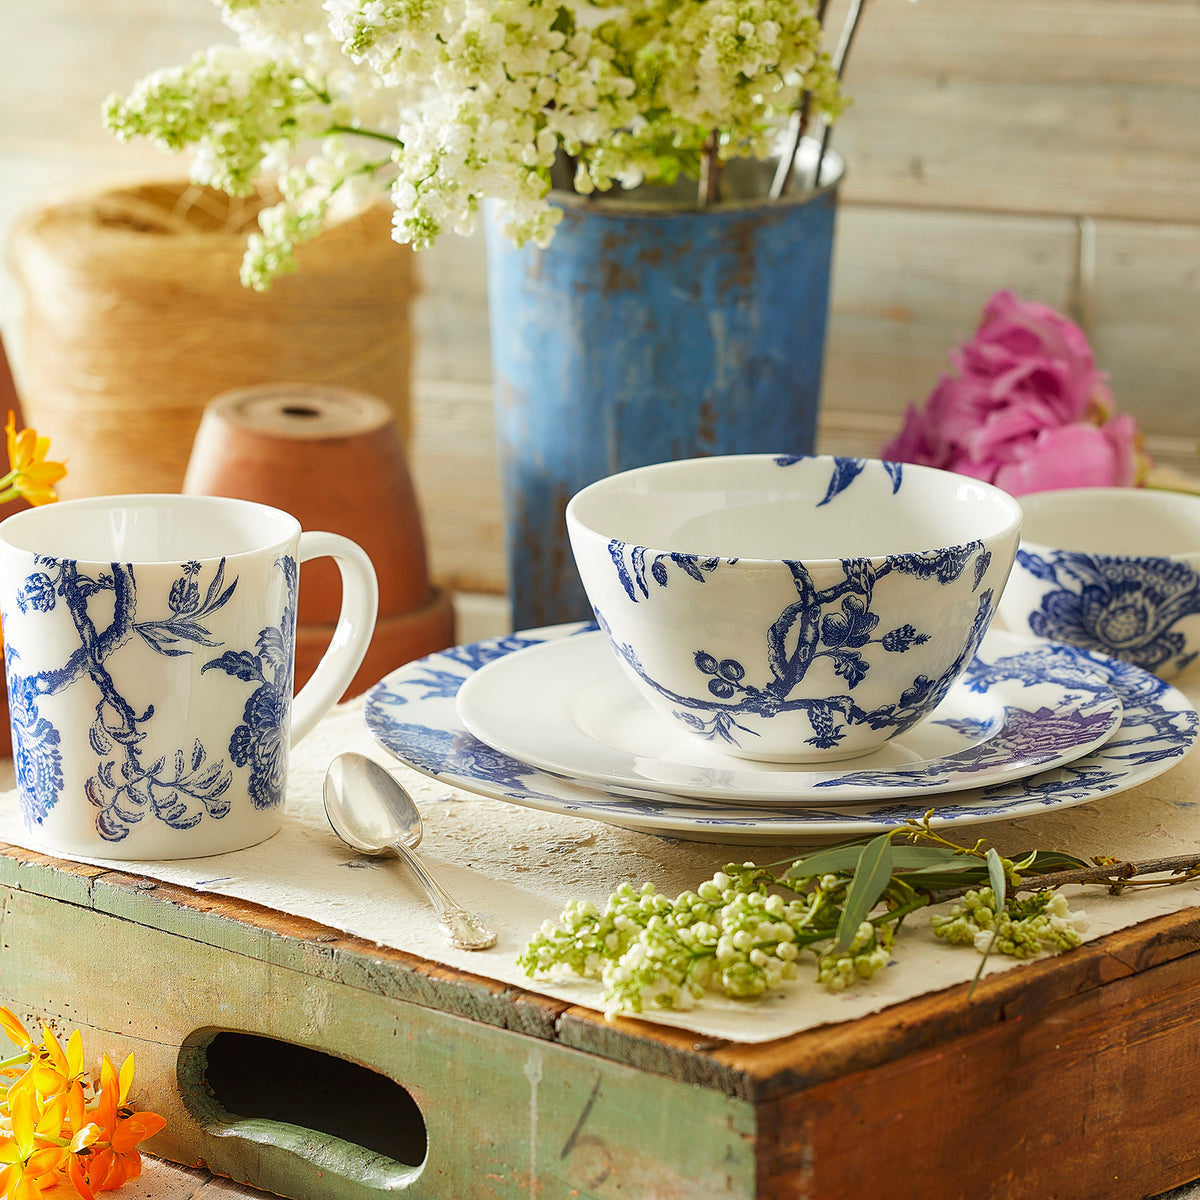 The Blue Arcadia Mug is shown here with the rest of the Arcadia Dinnerware Collection in a garden scene.